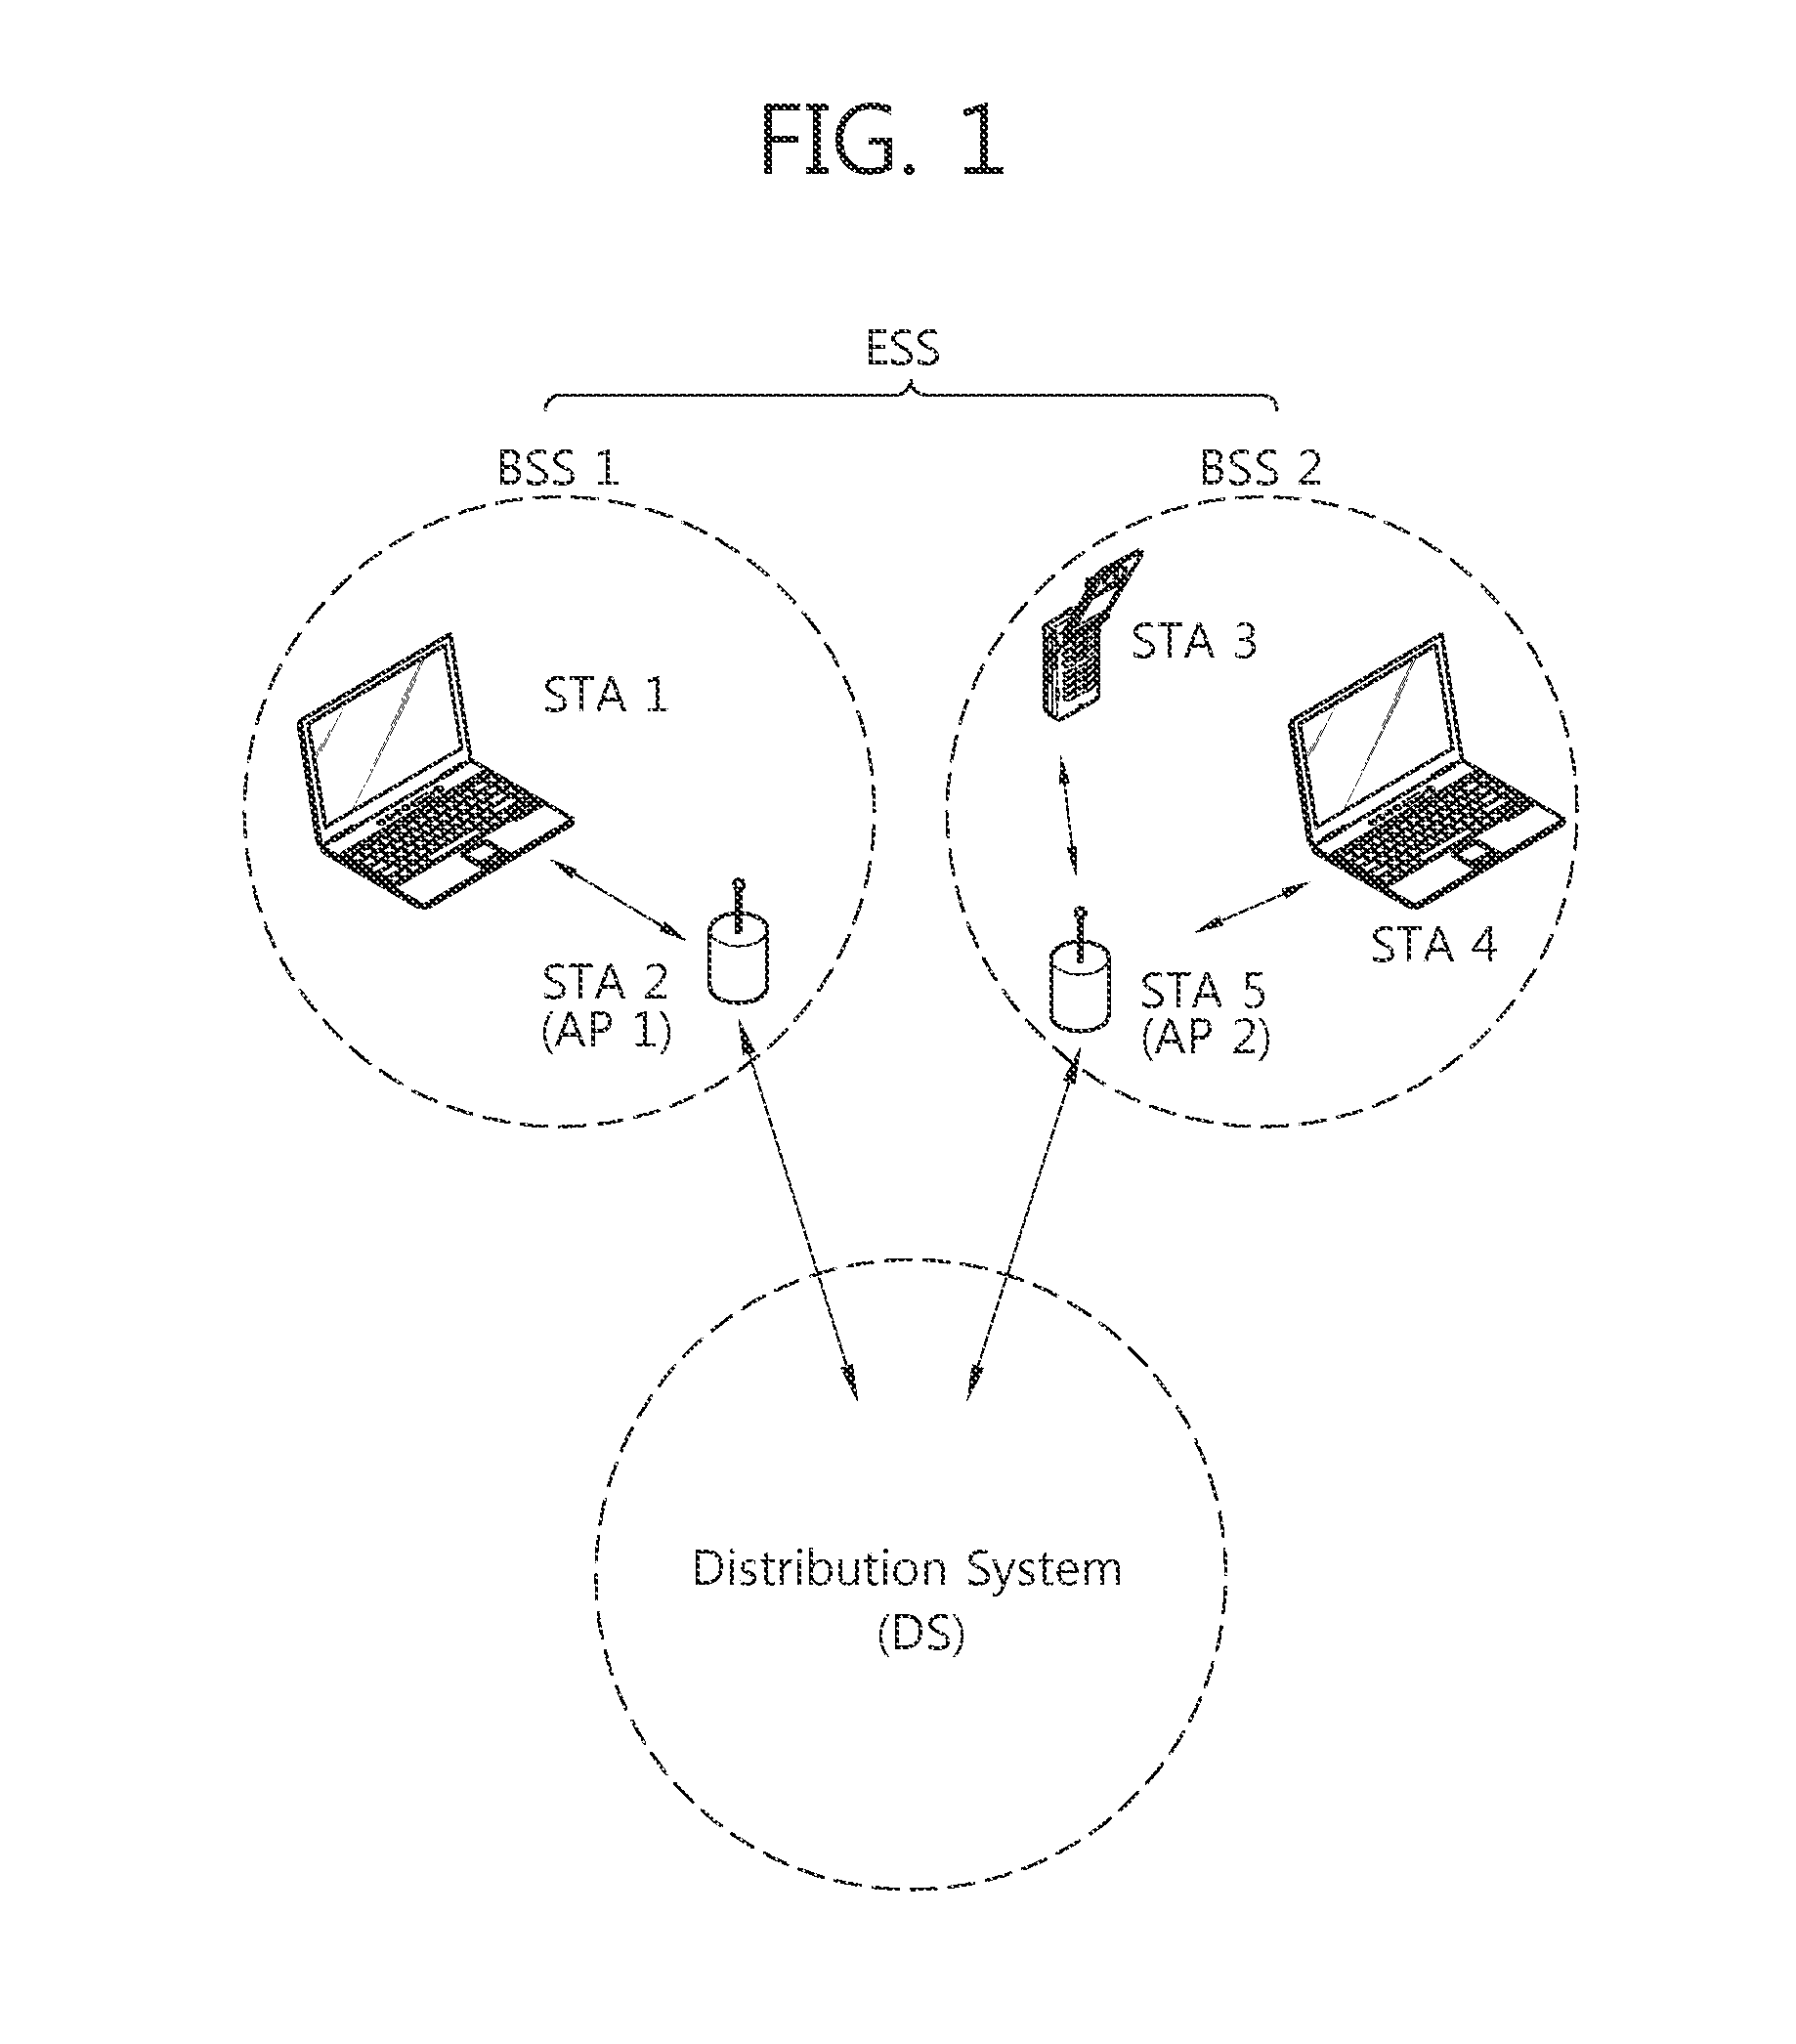 Method and apparatus for ACK transmission in a WLAN